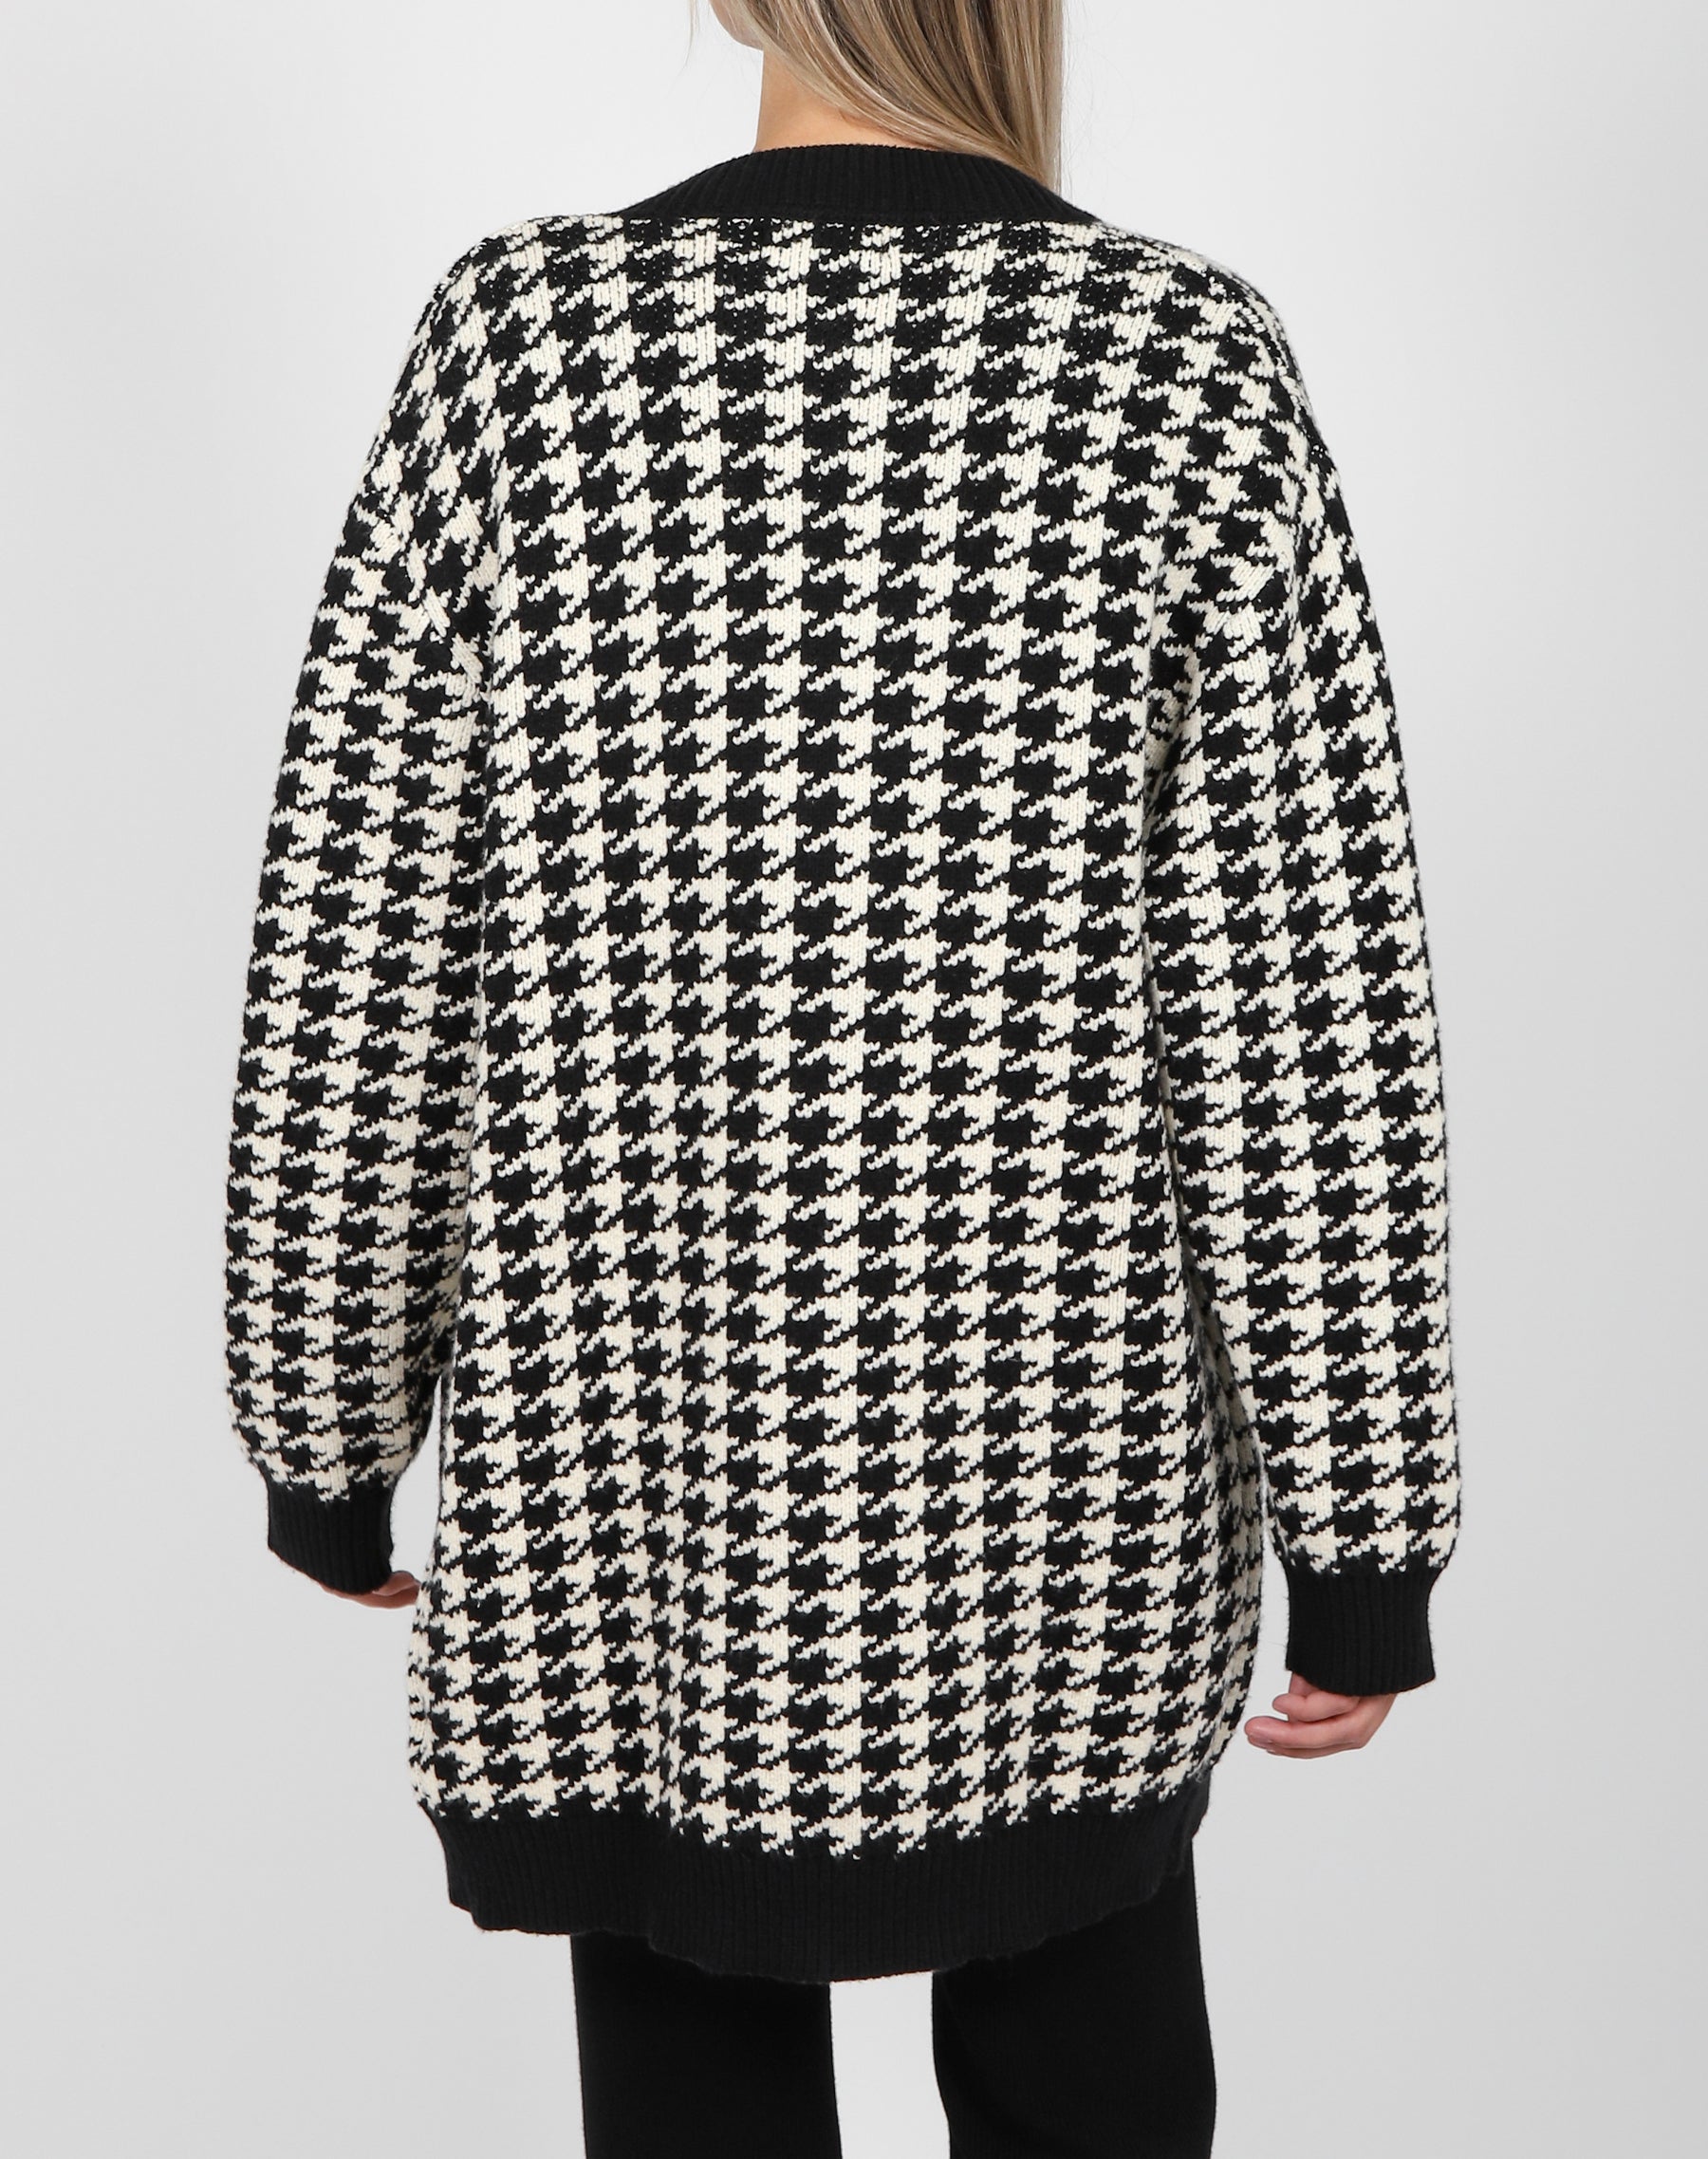 The Houndstooth Oversized Knit Cardigan | Houndstooth